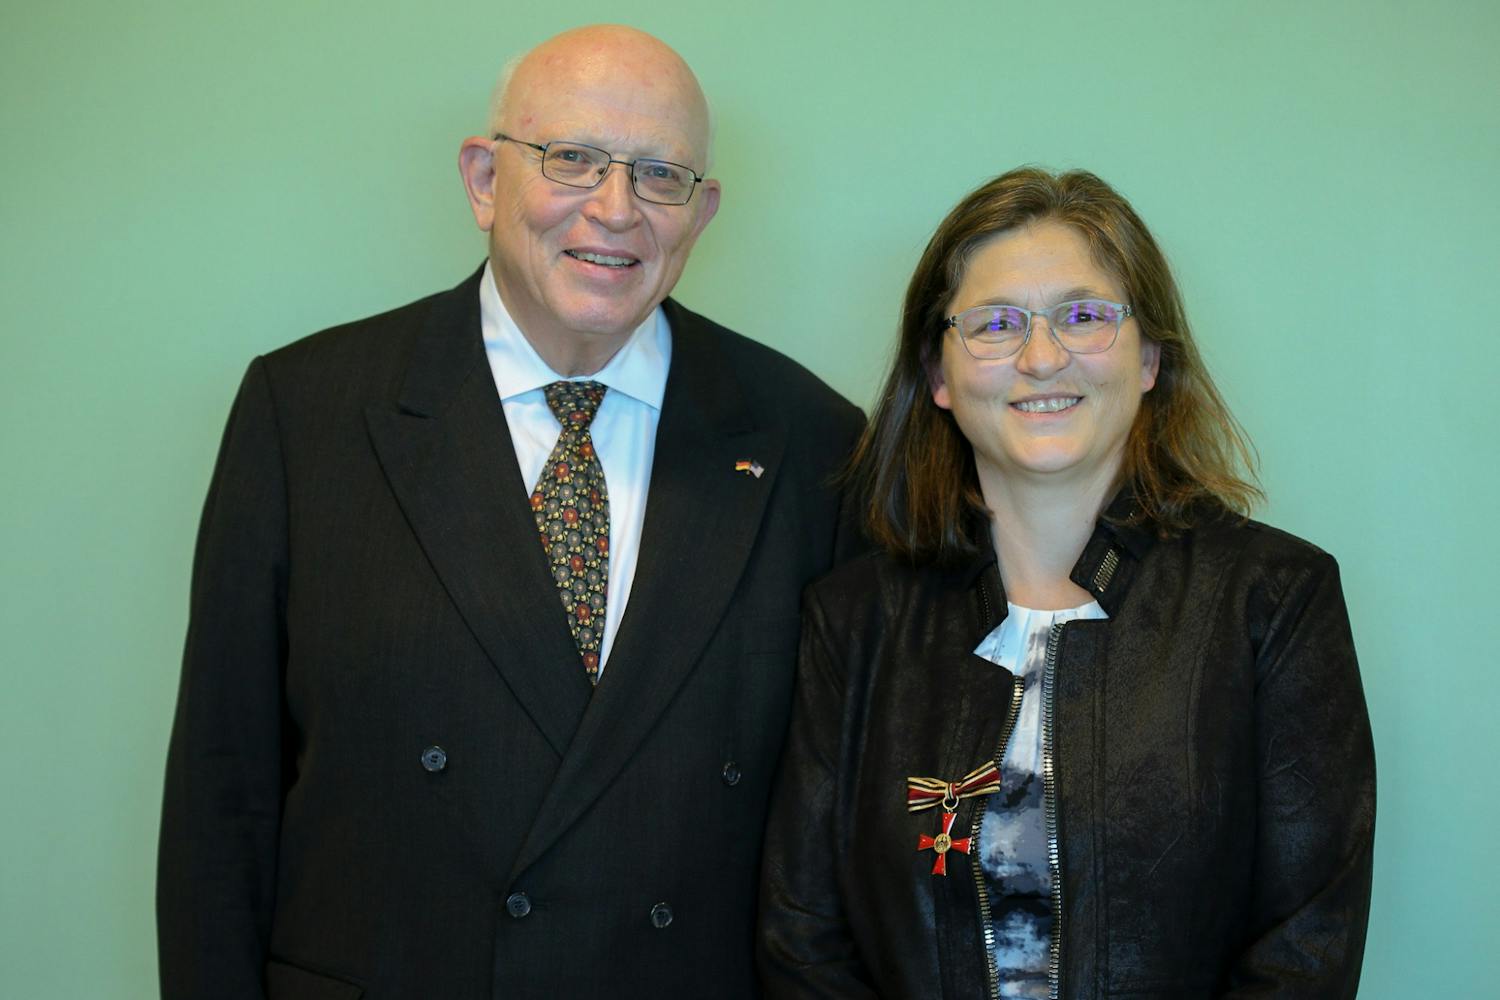 Professor Carla Damiano receives the highest honor given by Germany 